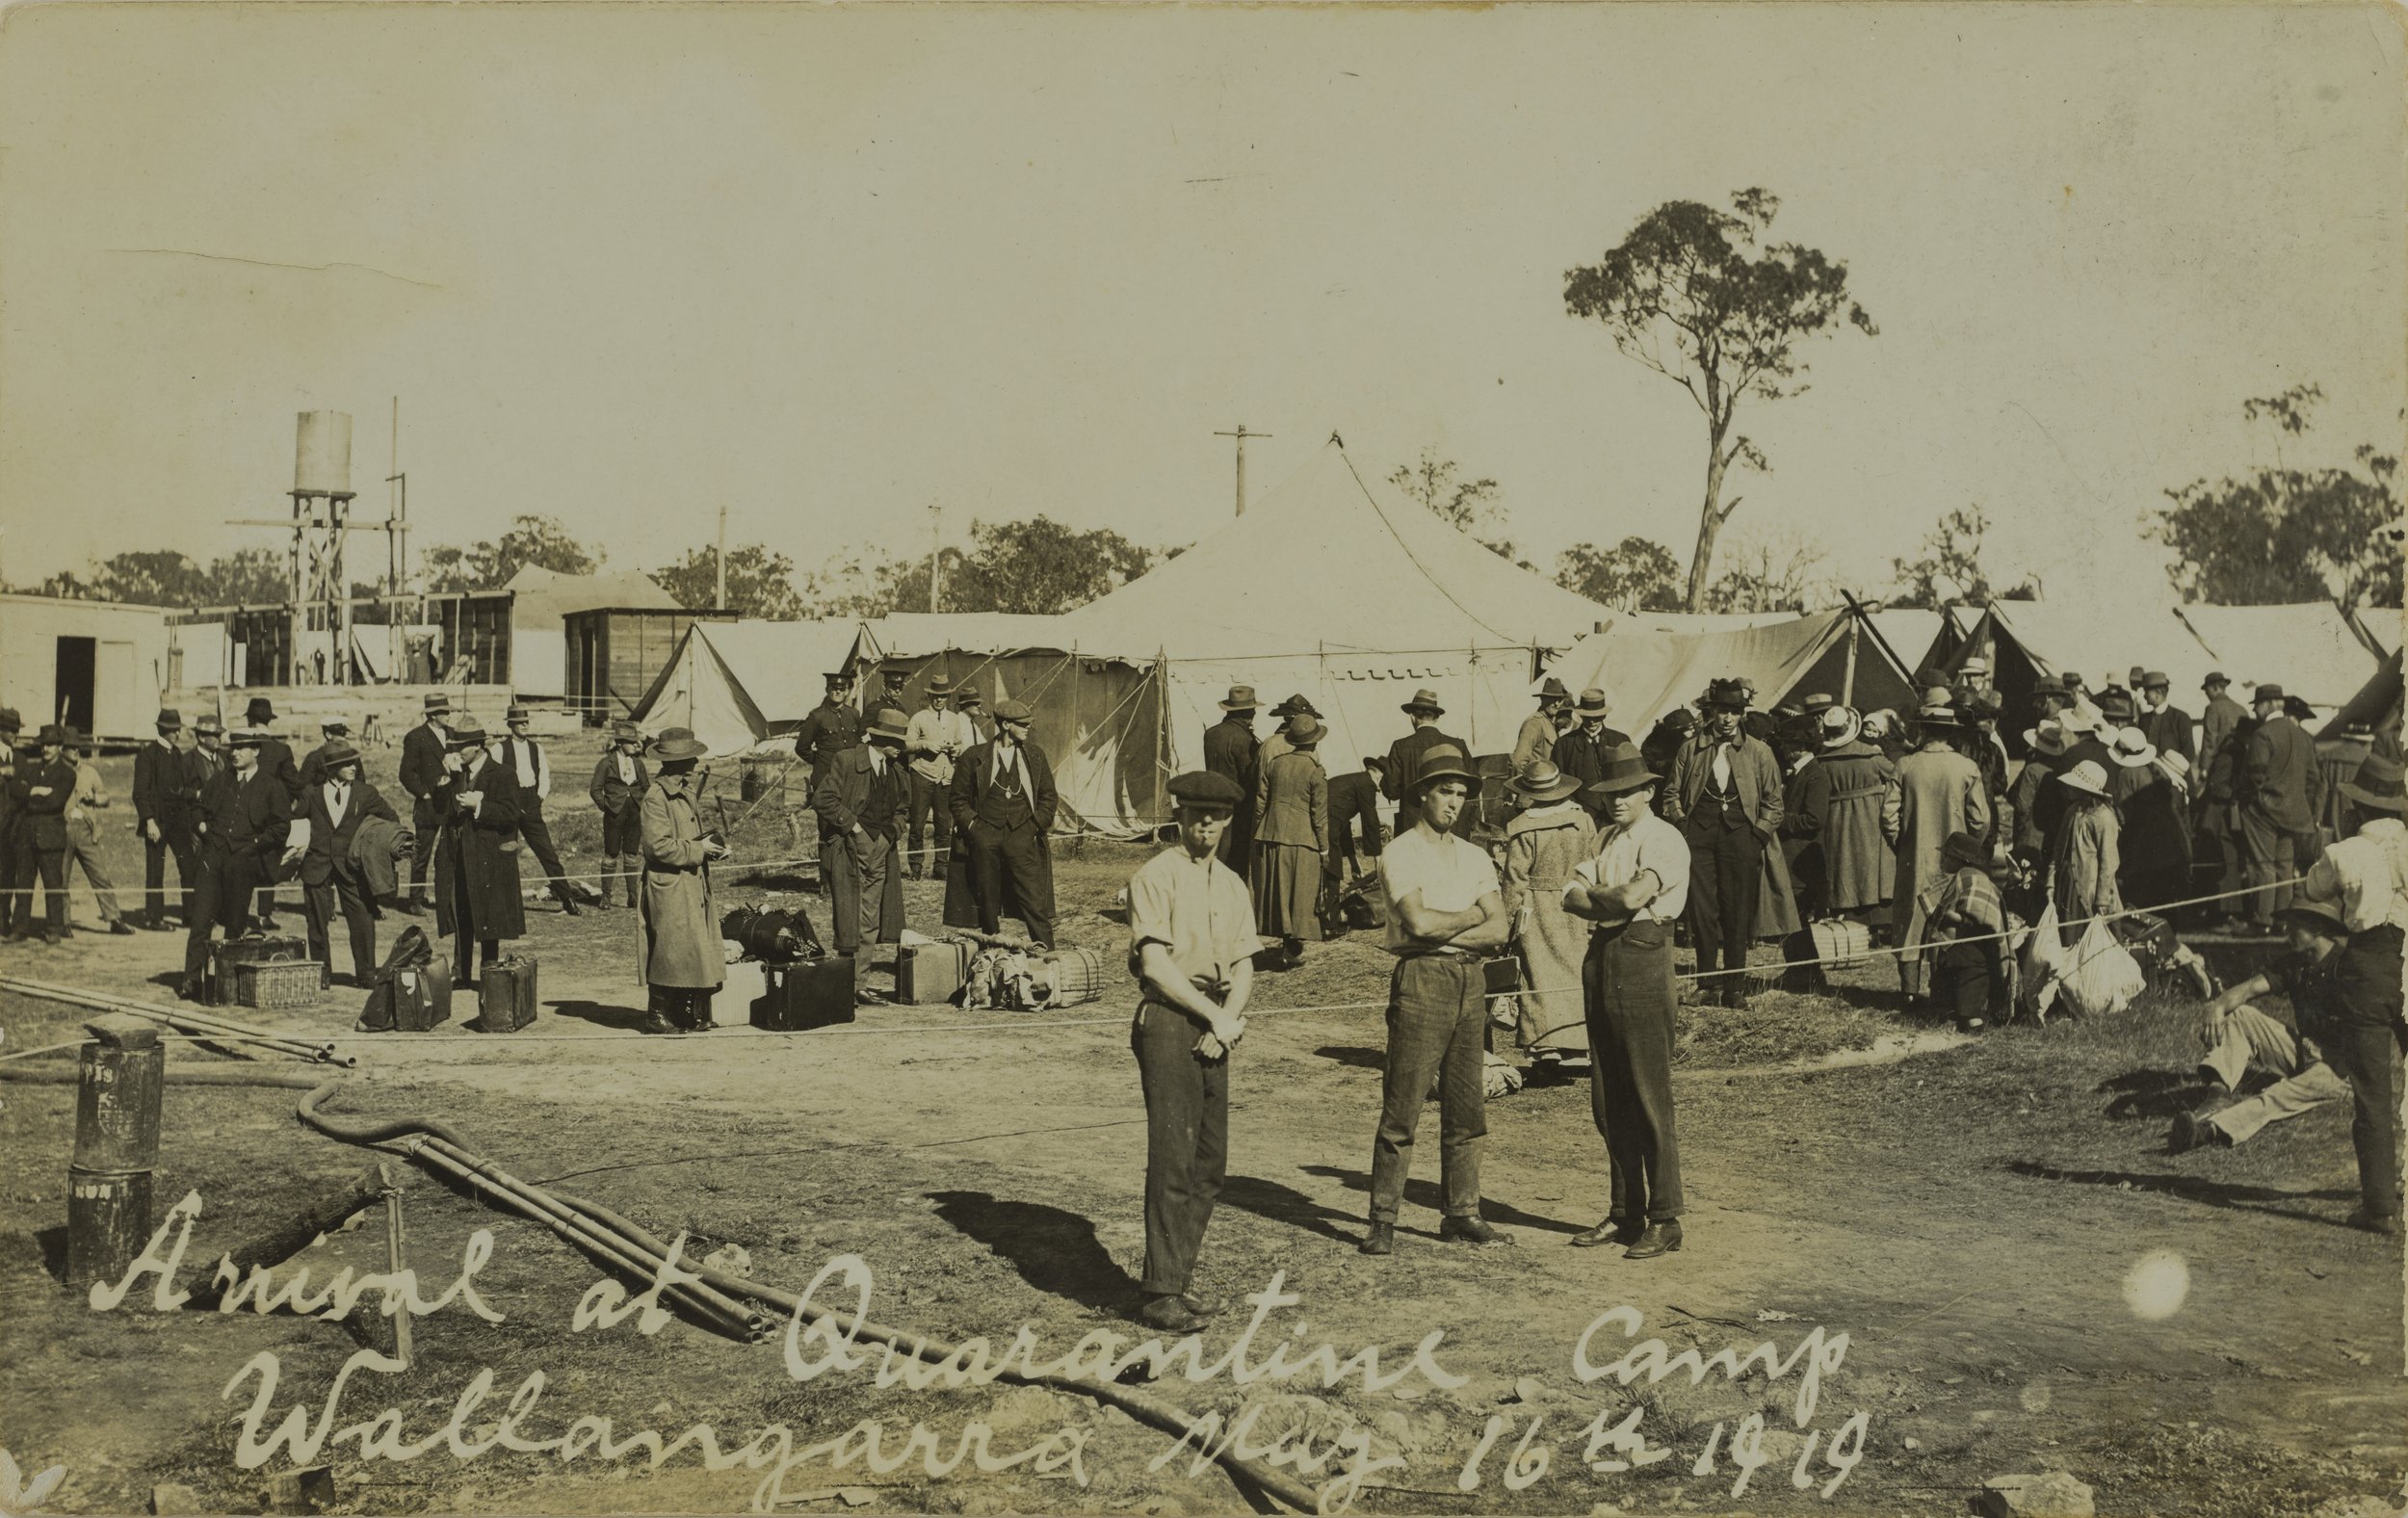 Groups of people with their belongings on arrival at the Wallangarra Quarantine camp, May 1919 SLQ.jpg